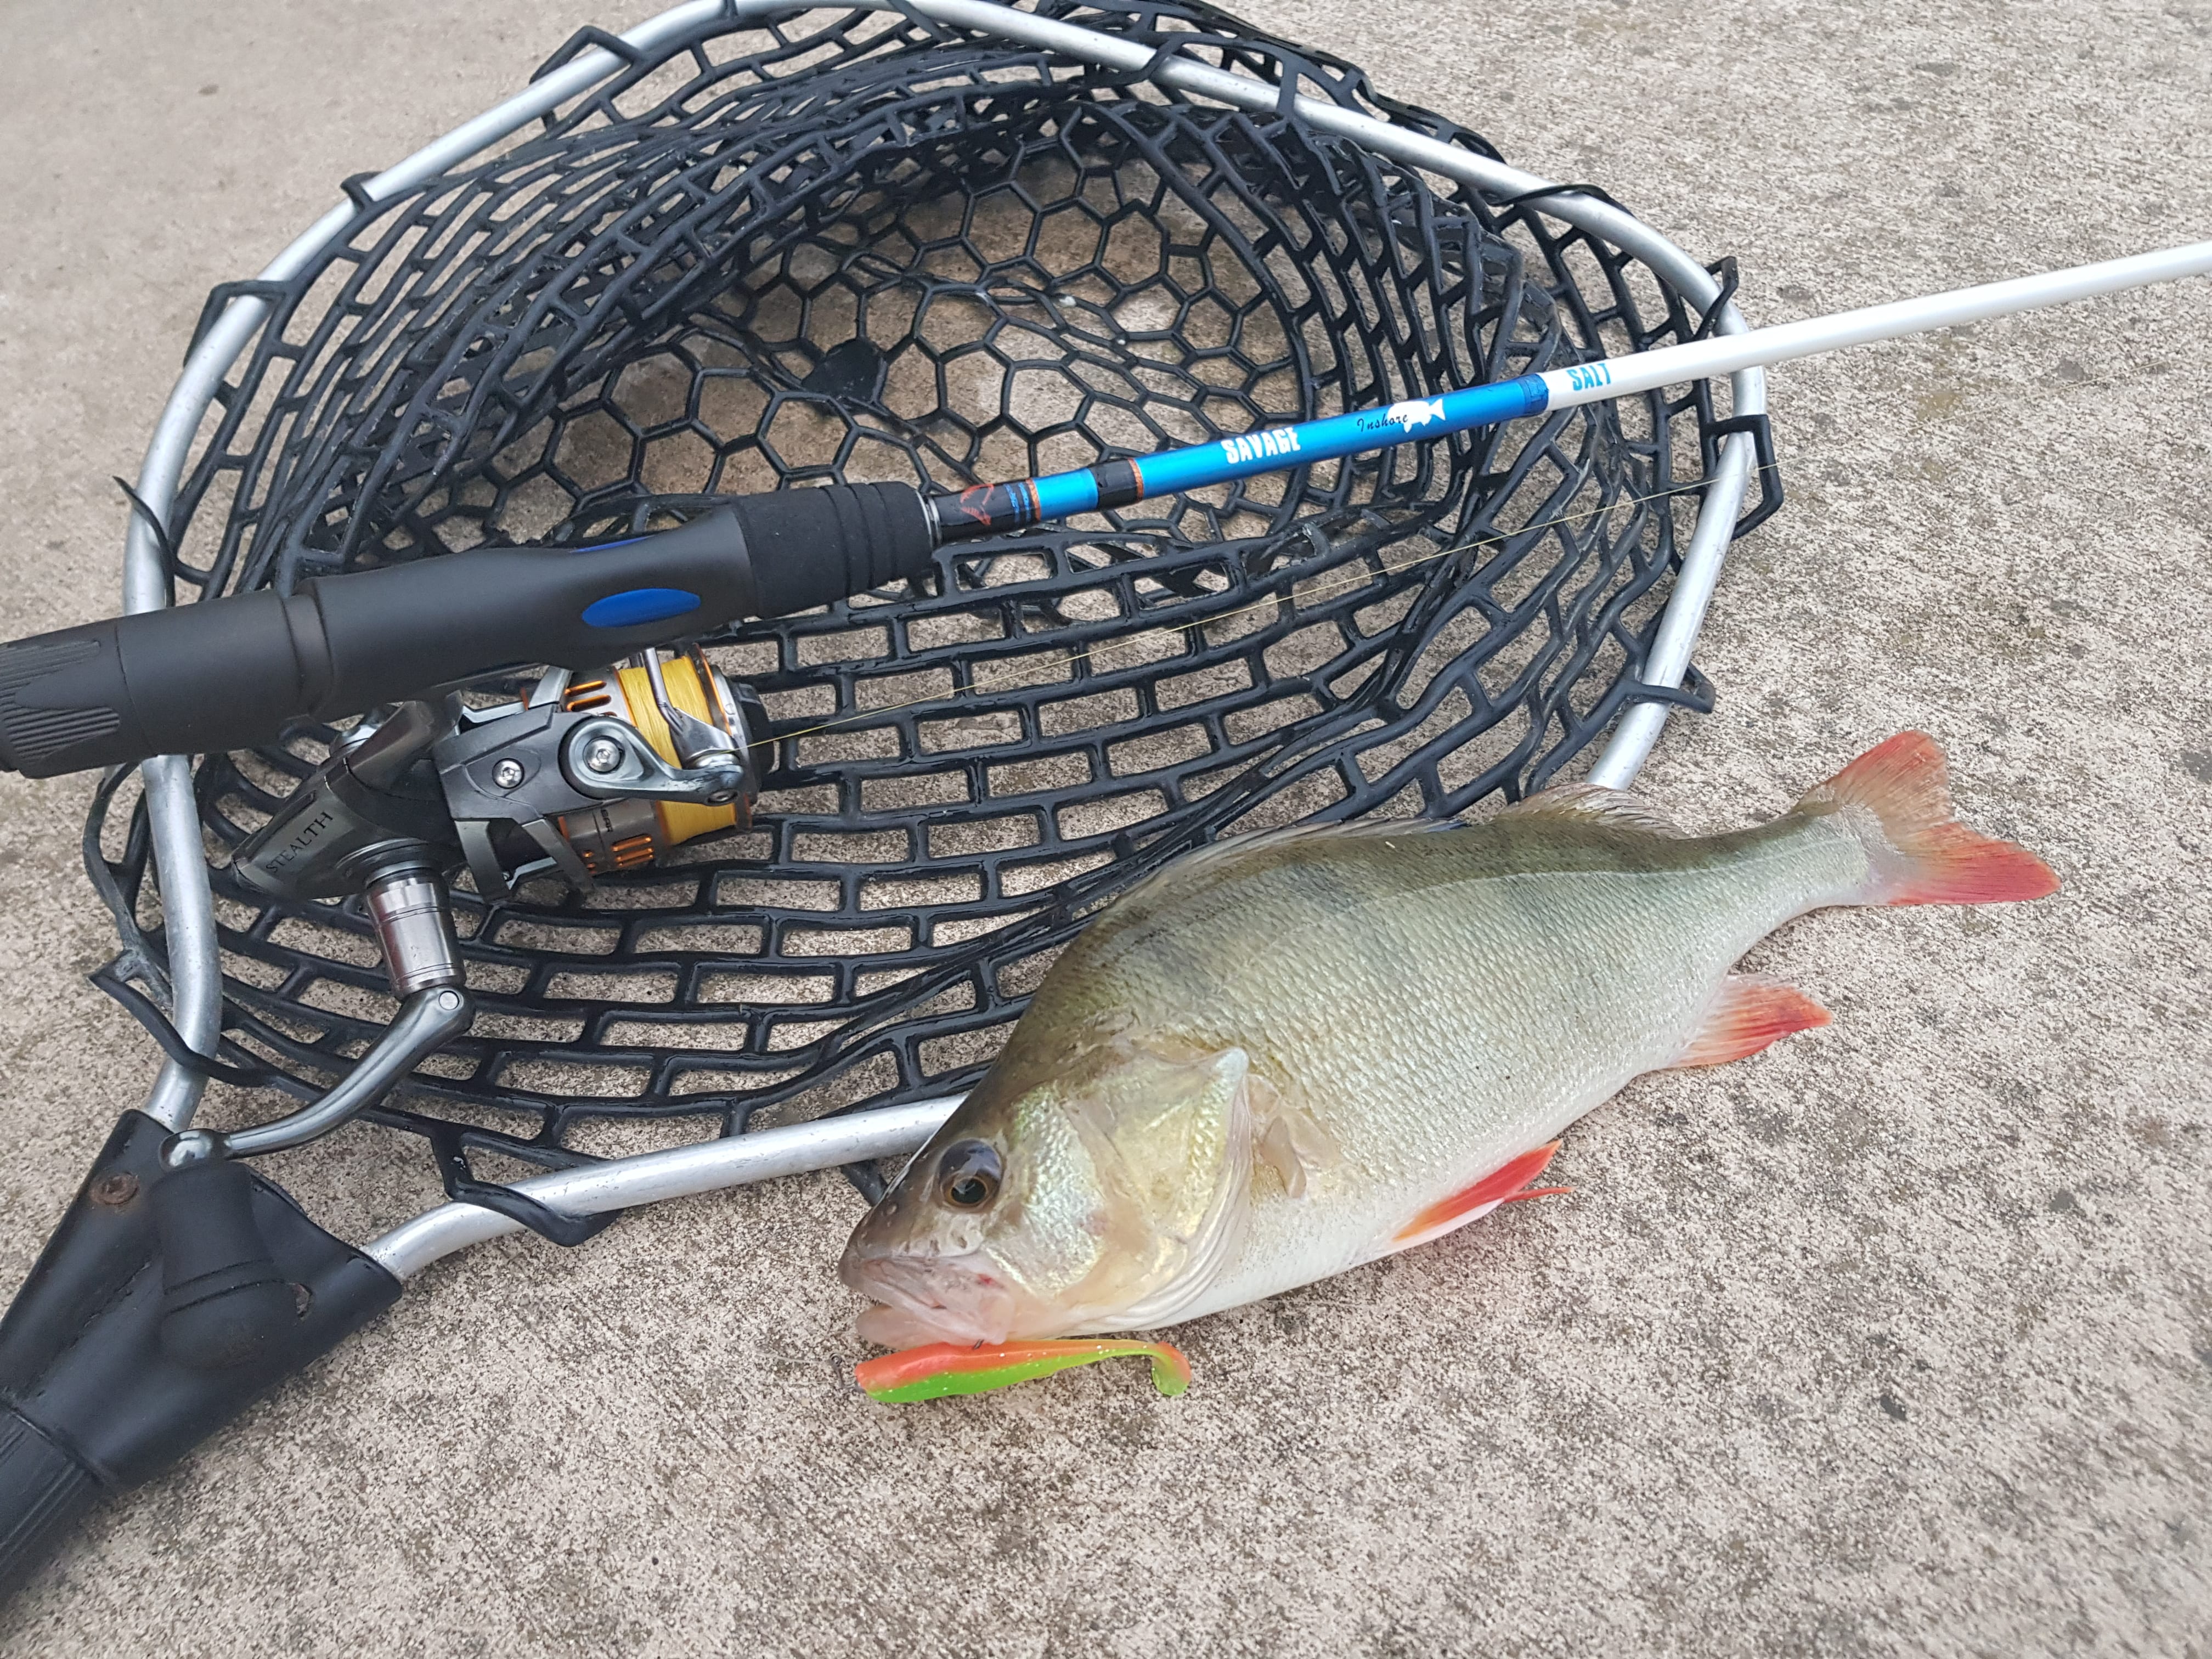 Slim minnows and 1DFR rods a great combo